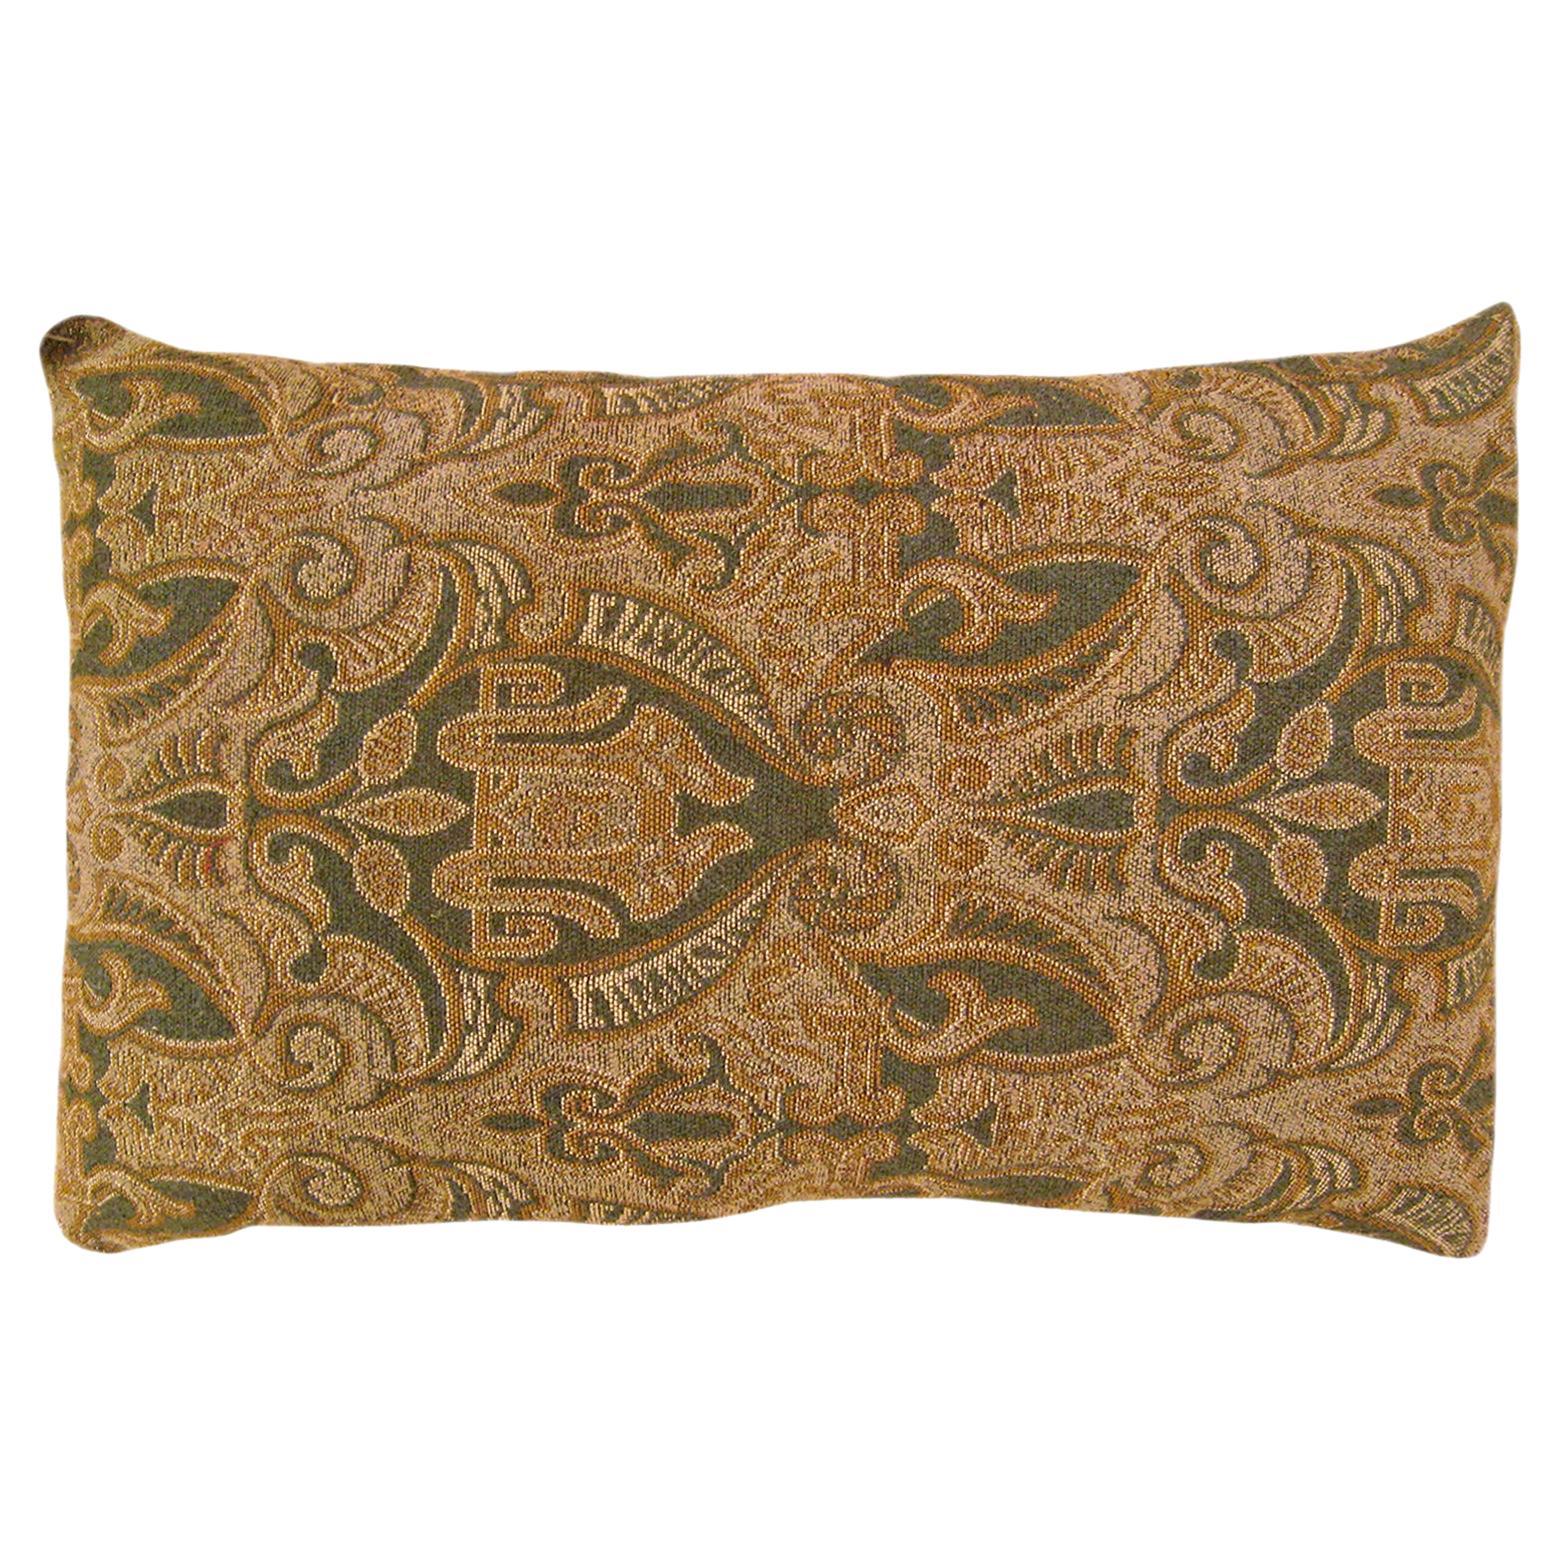 Decorative Antique Jacquard Tapestry Pillow with Geometric Abstracts Allover